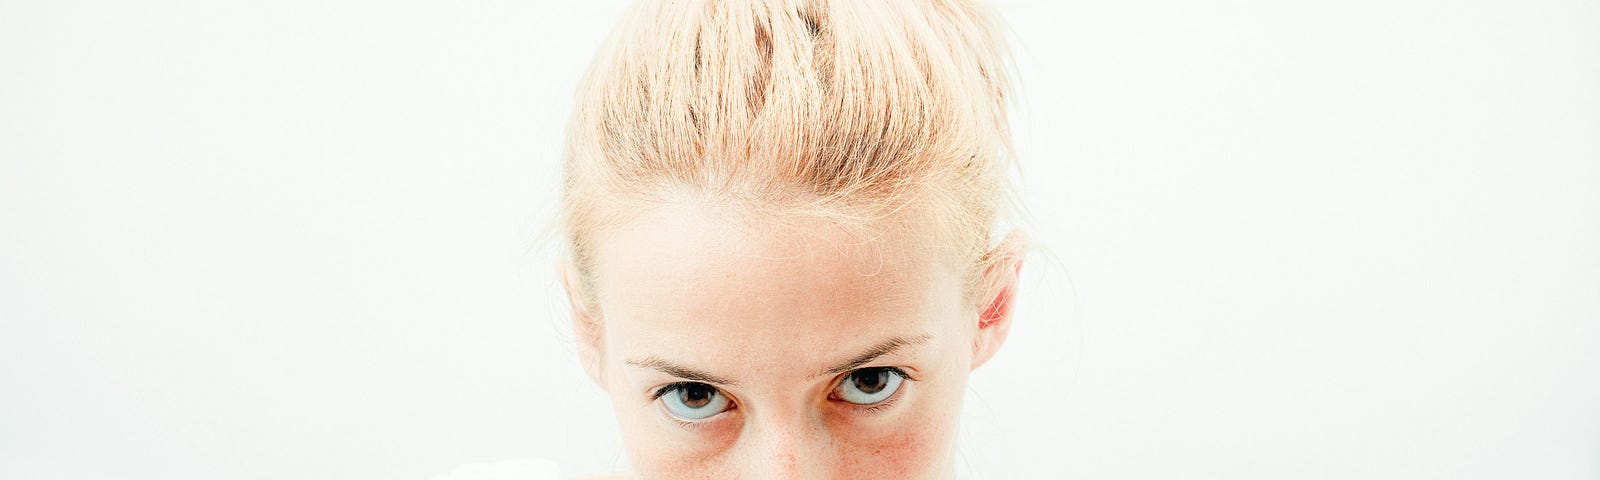 Blonde woman with a ponytail and bloodied nose